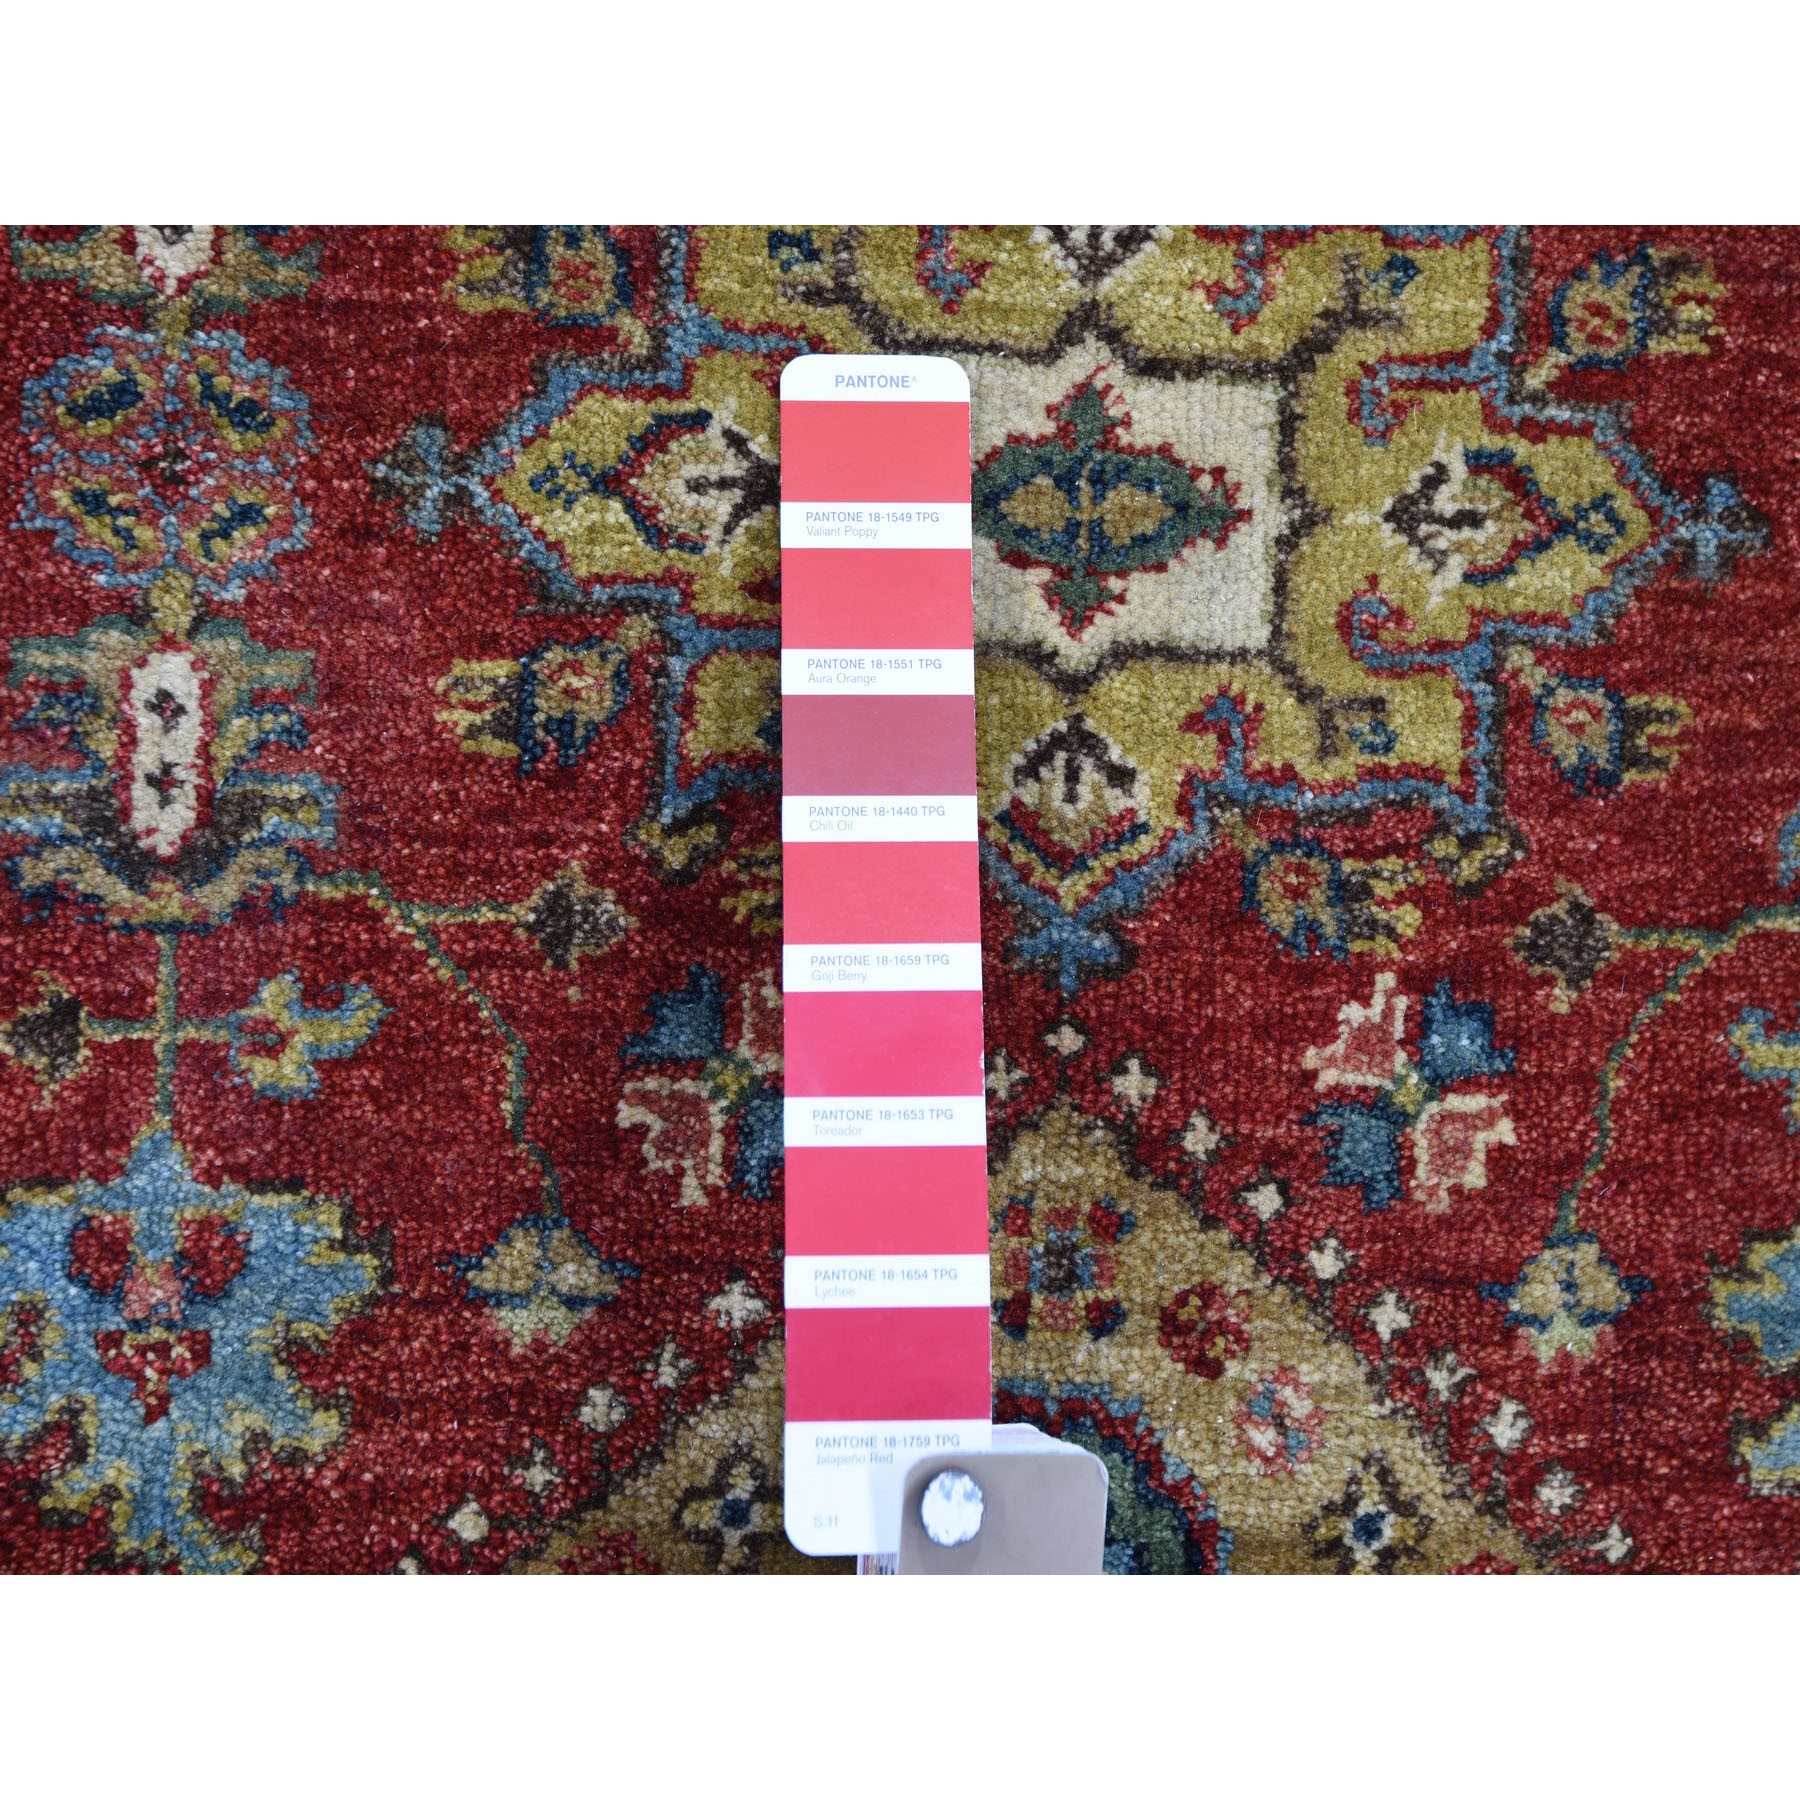 2-6 x8- Red Karajeh Design Runner Pure Wool Hand Knotted Oriental Rug 